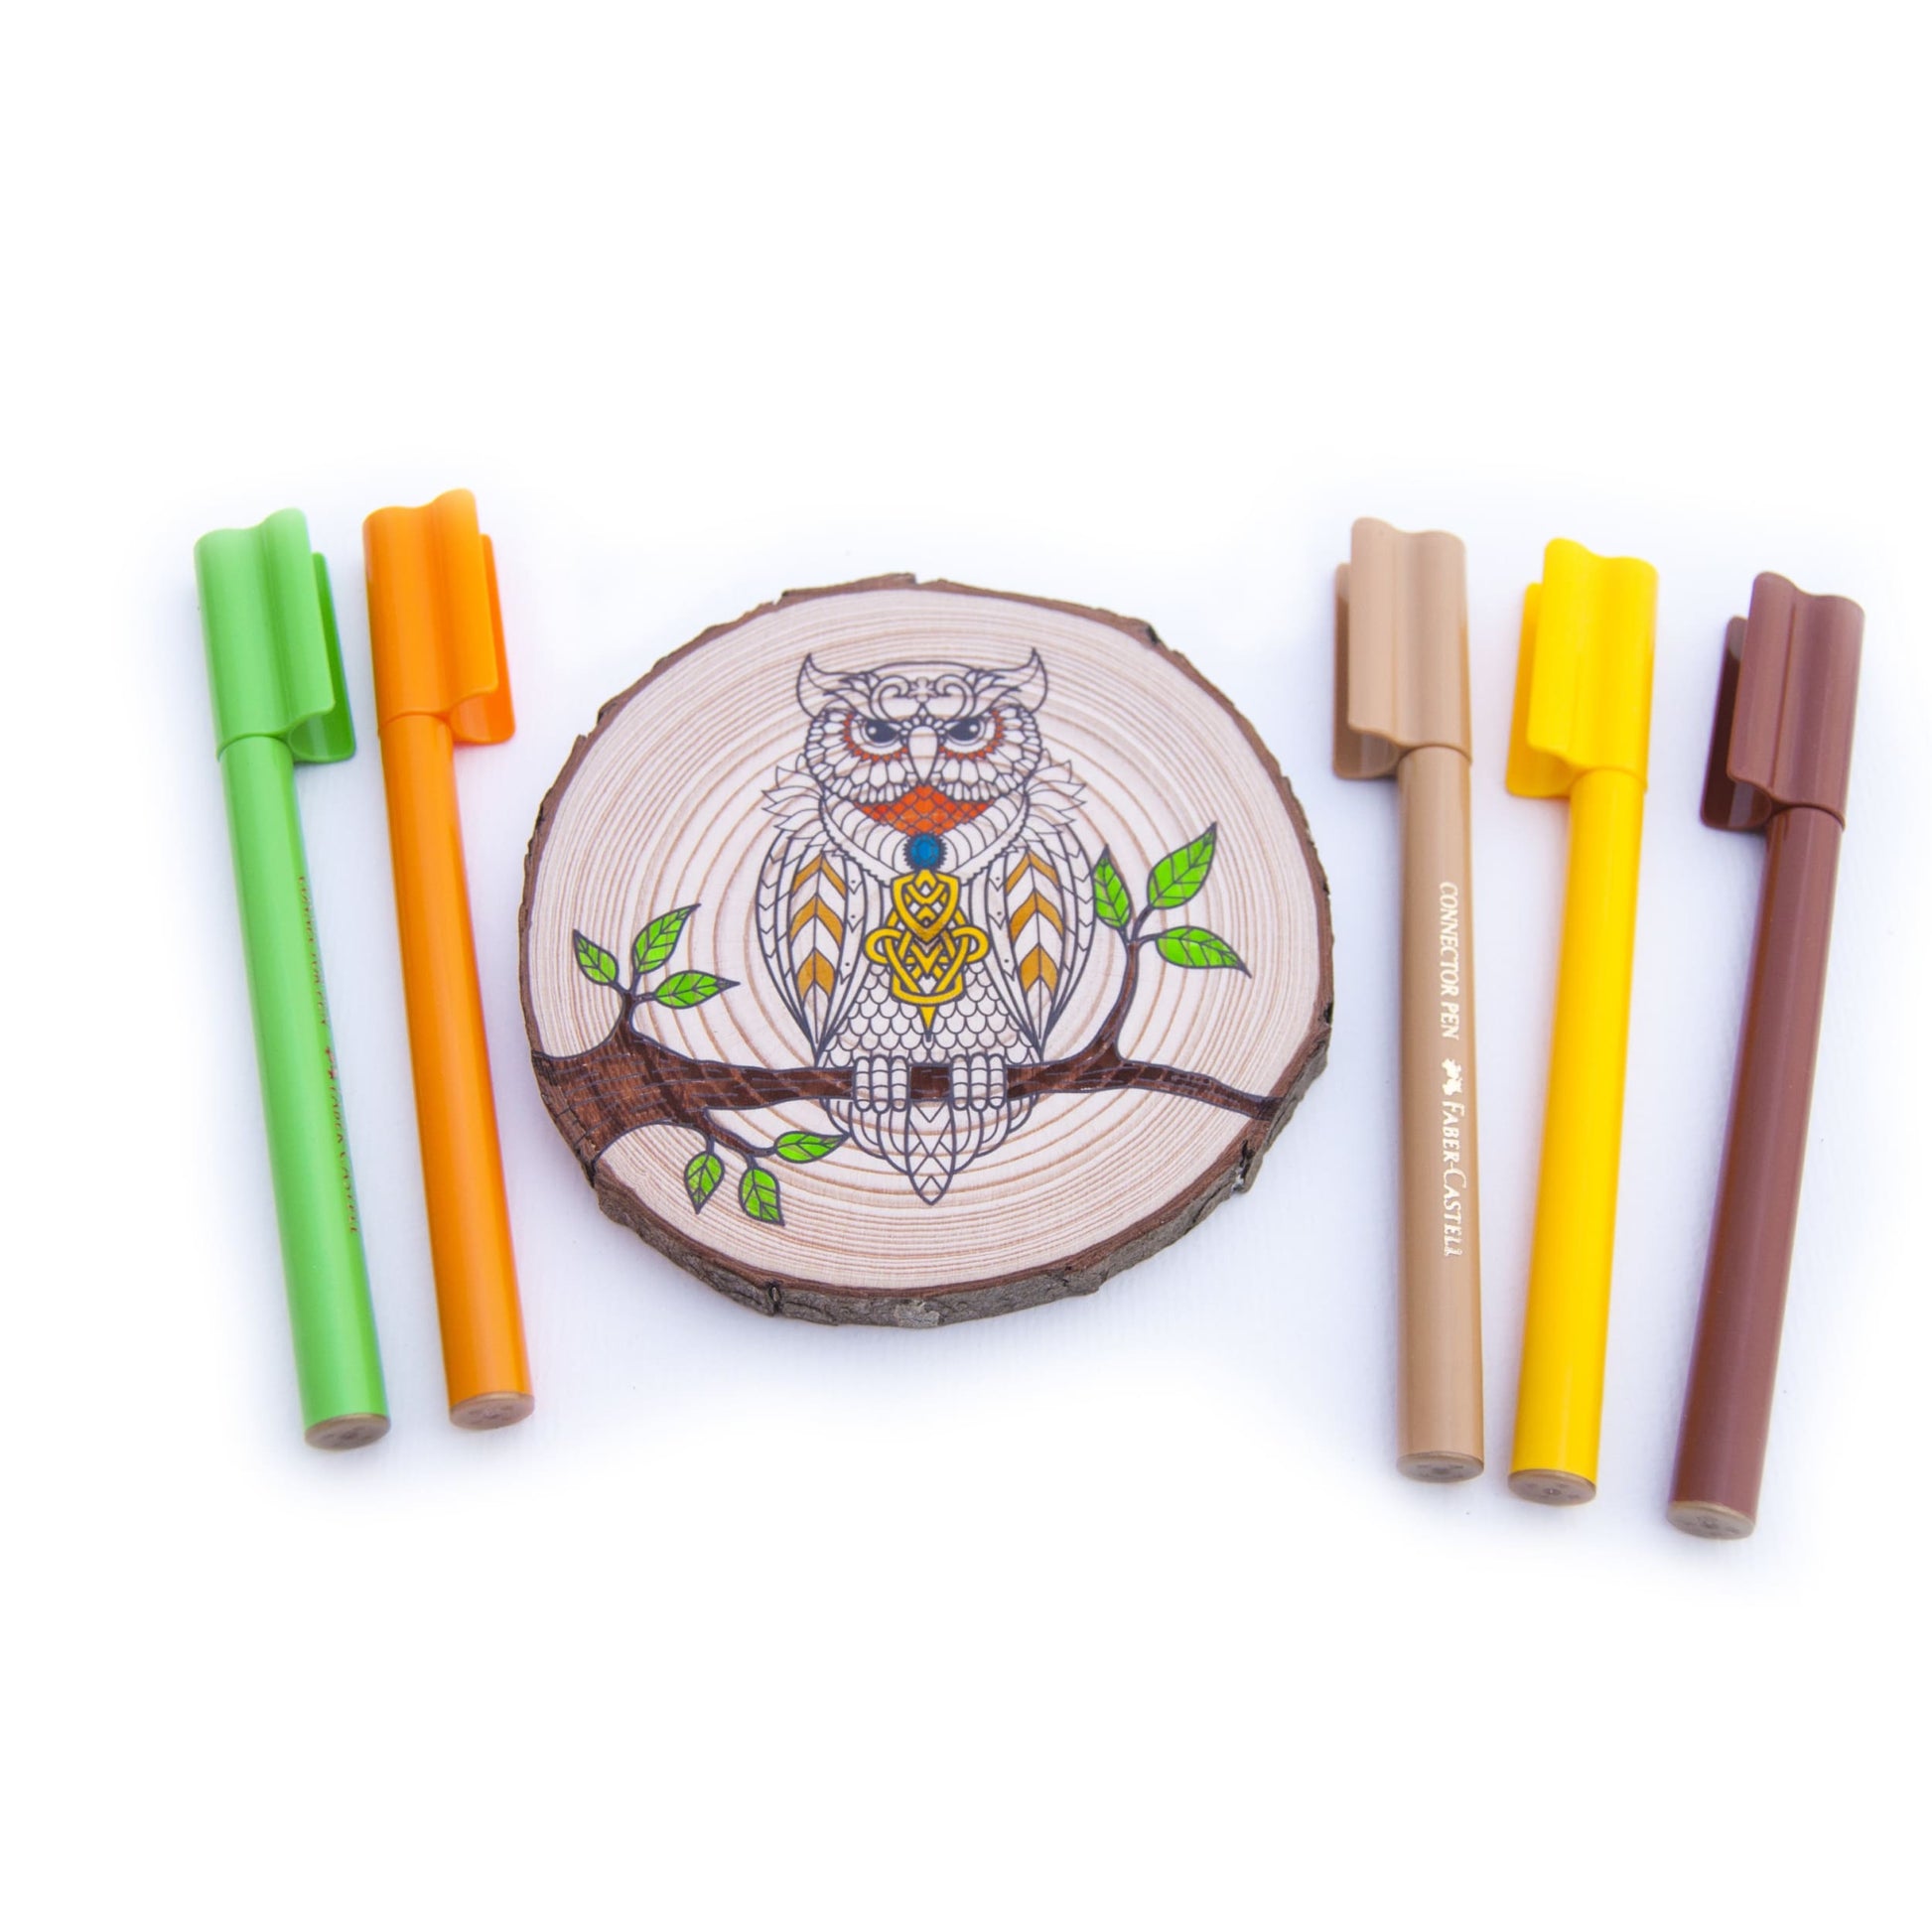 Colouring Wood Slice - Owl - Colouring